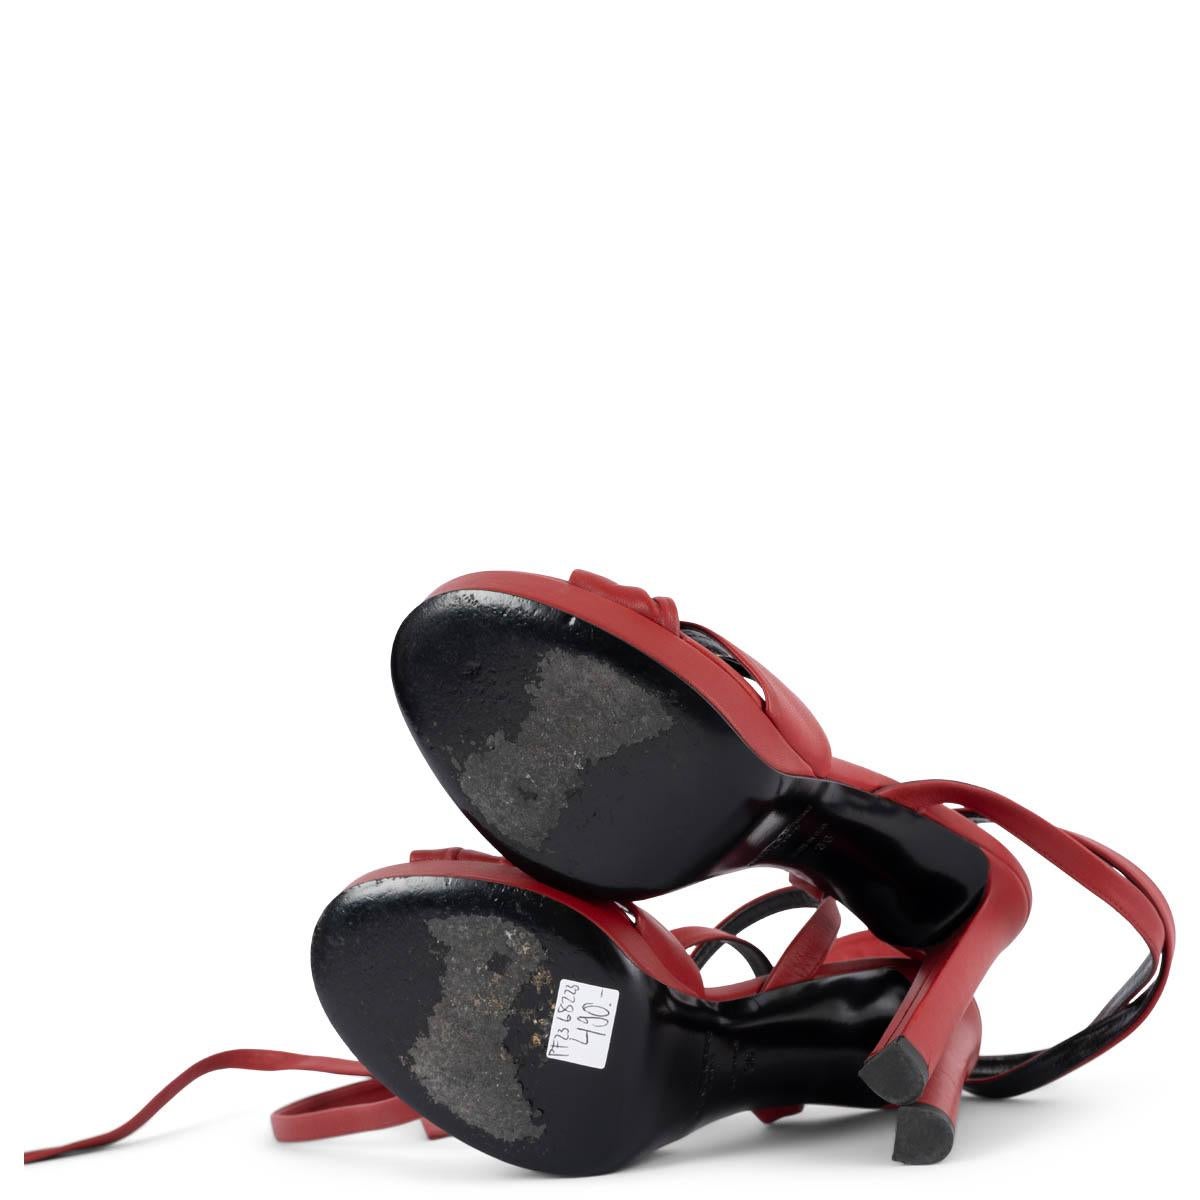 SAINT LAURENT red leather HALL 105 ANKLE STRAP Sandals Shoes 36 For Sale 2